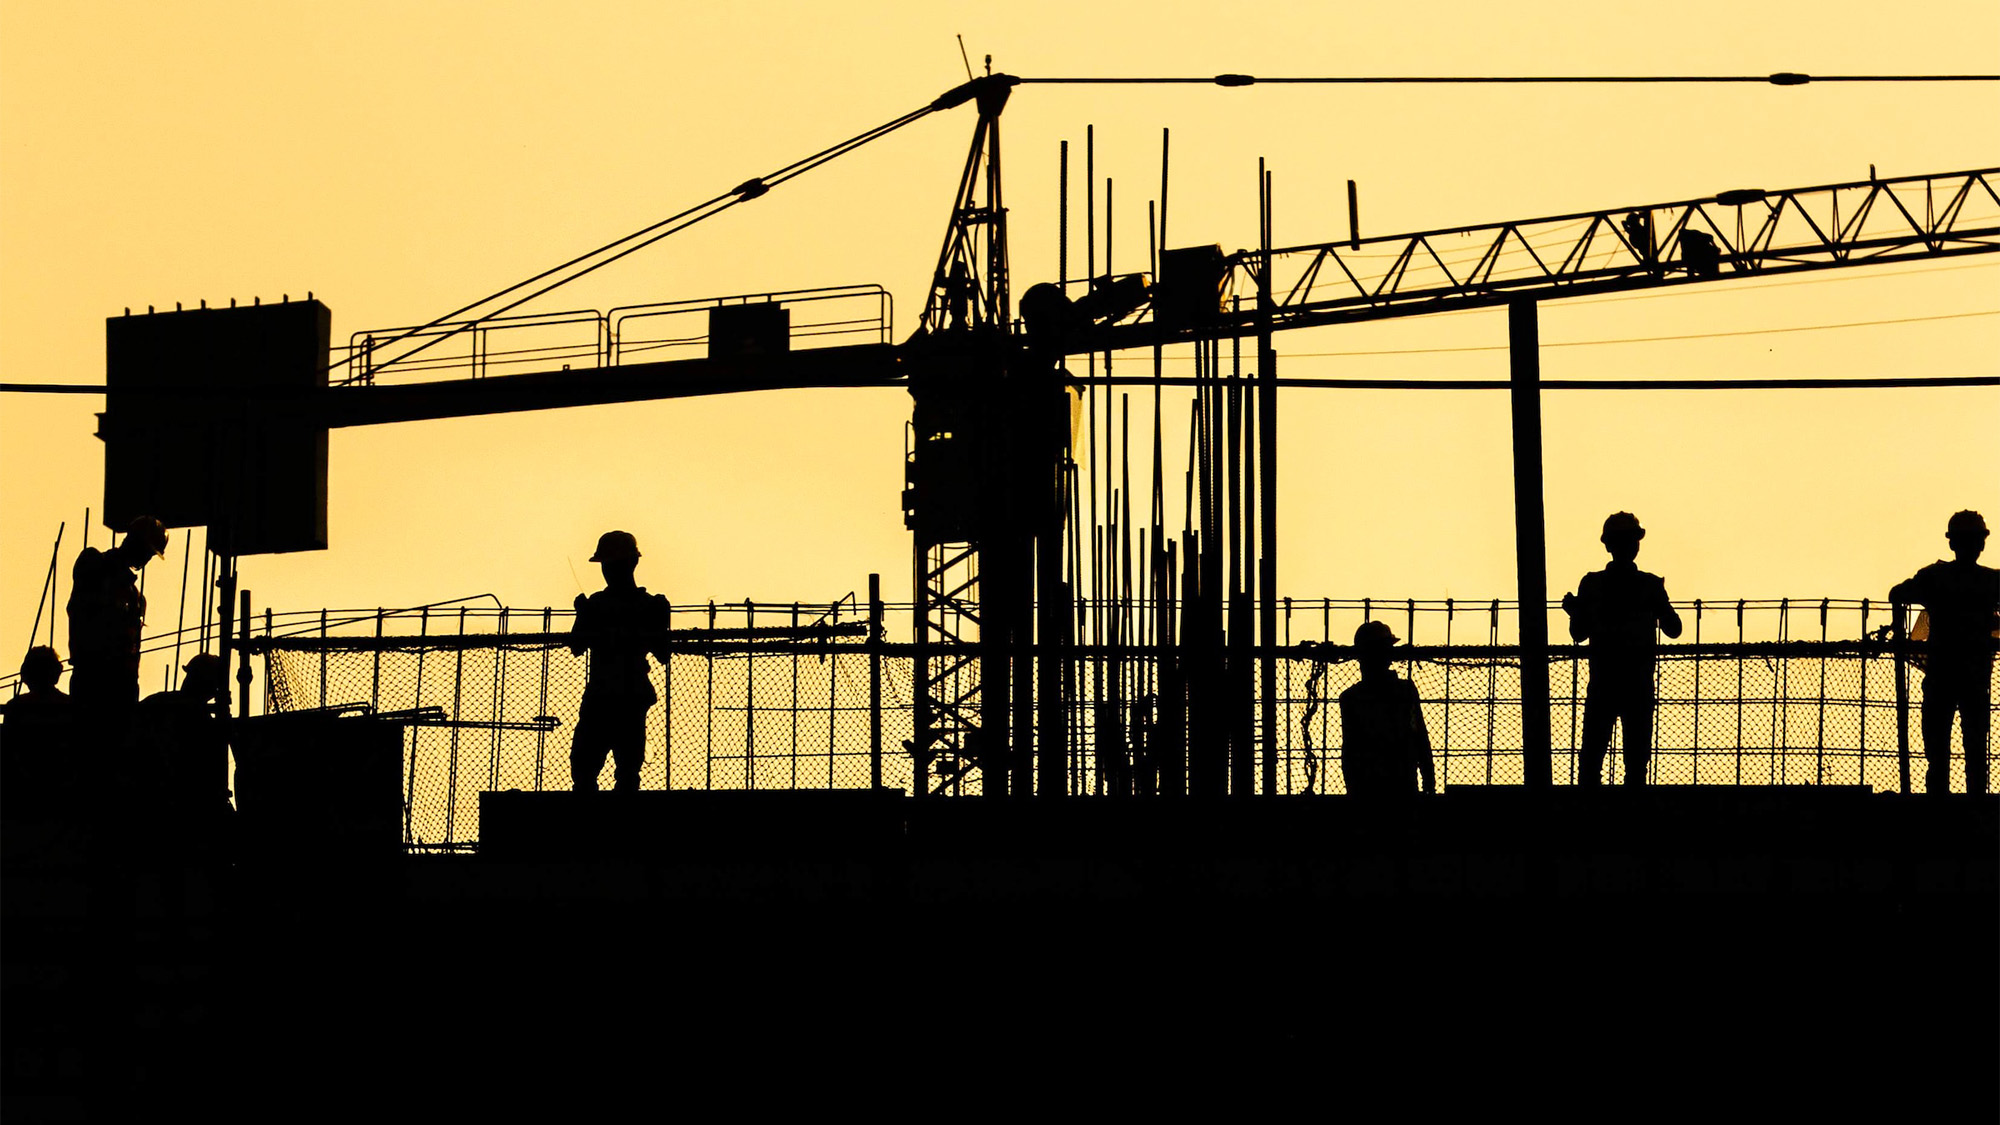 Construction workers and a crane a silhouetted against a bright yellow sky